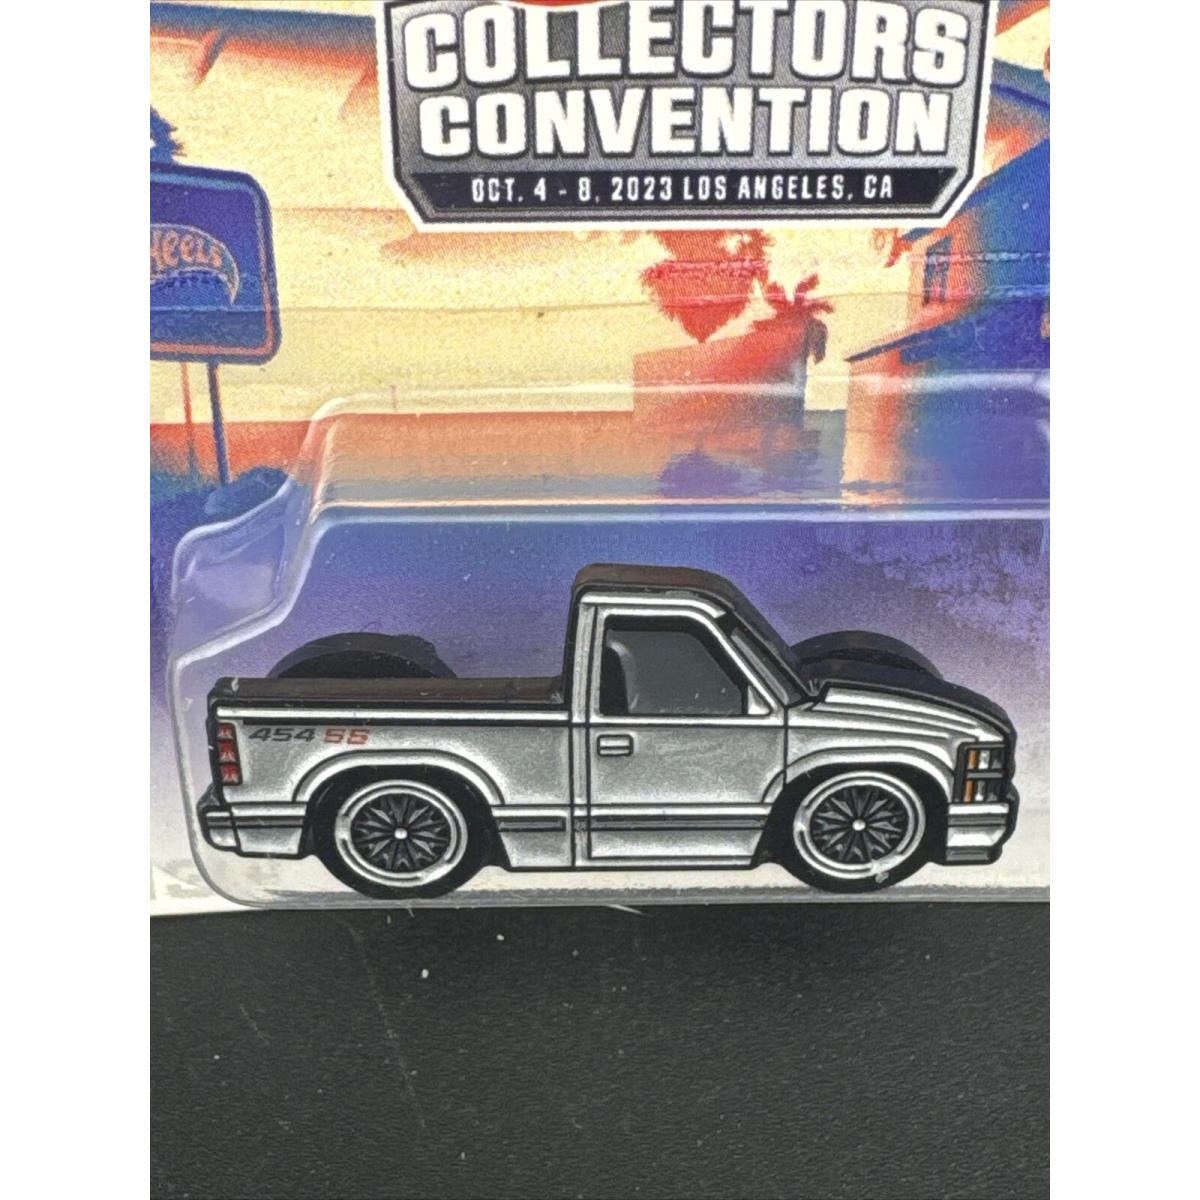 2023 Hot Wheels Silver 1990 Chevy 454 SS 37th Convention P